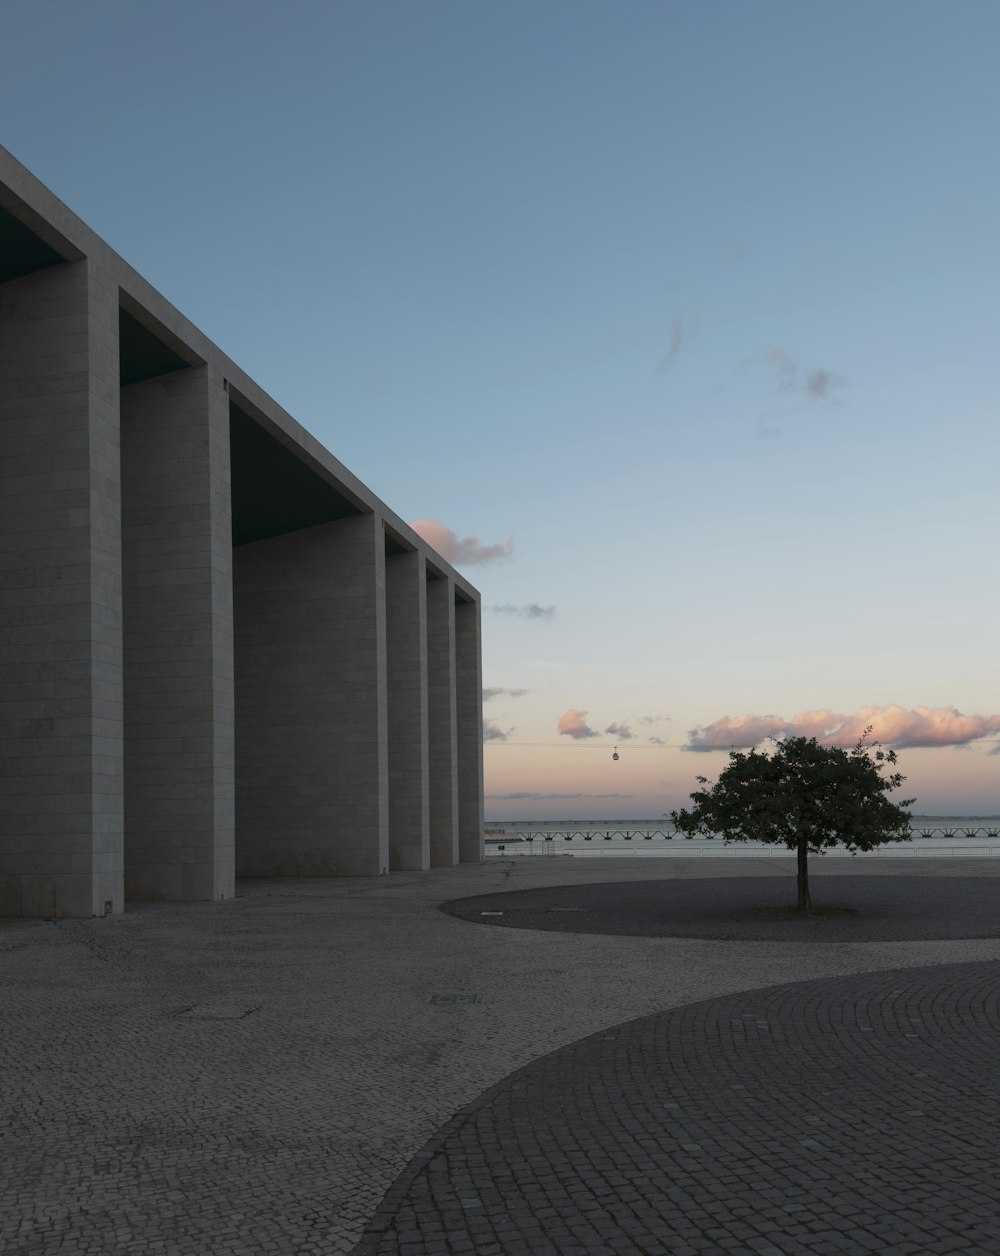 a lone tree in front of a concrete building